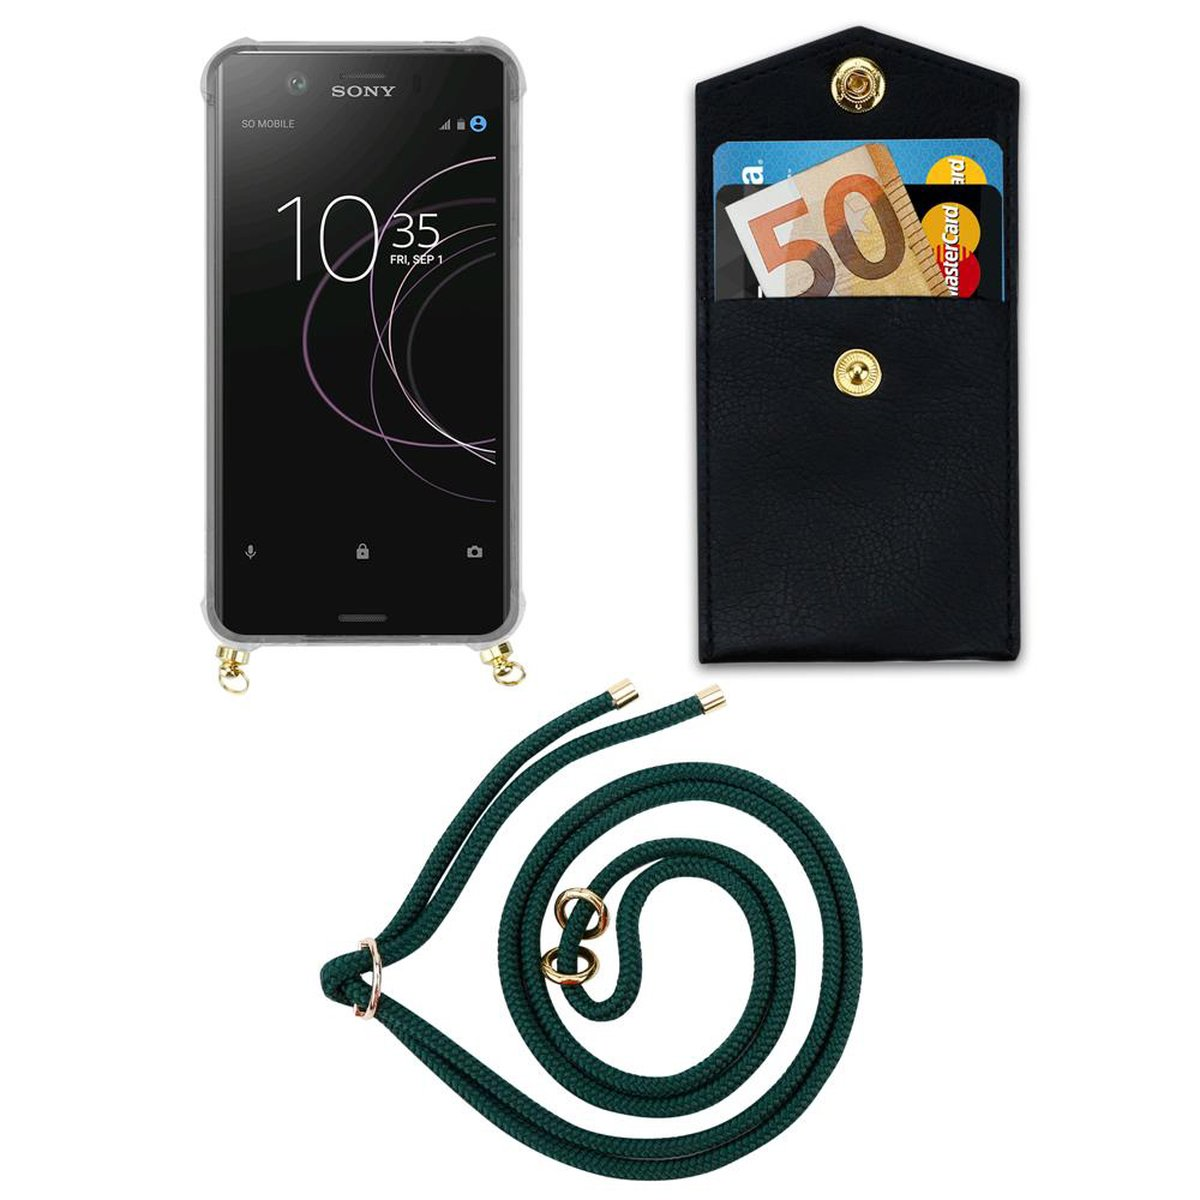 ARMEE Gold Sony, CADORABO abnehmbarer Xperia Kordel Kette mit Hülle, Ringen, XZ1 GRÜN Handy Band Backcover, und COMPACT,